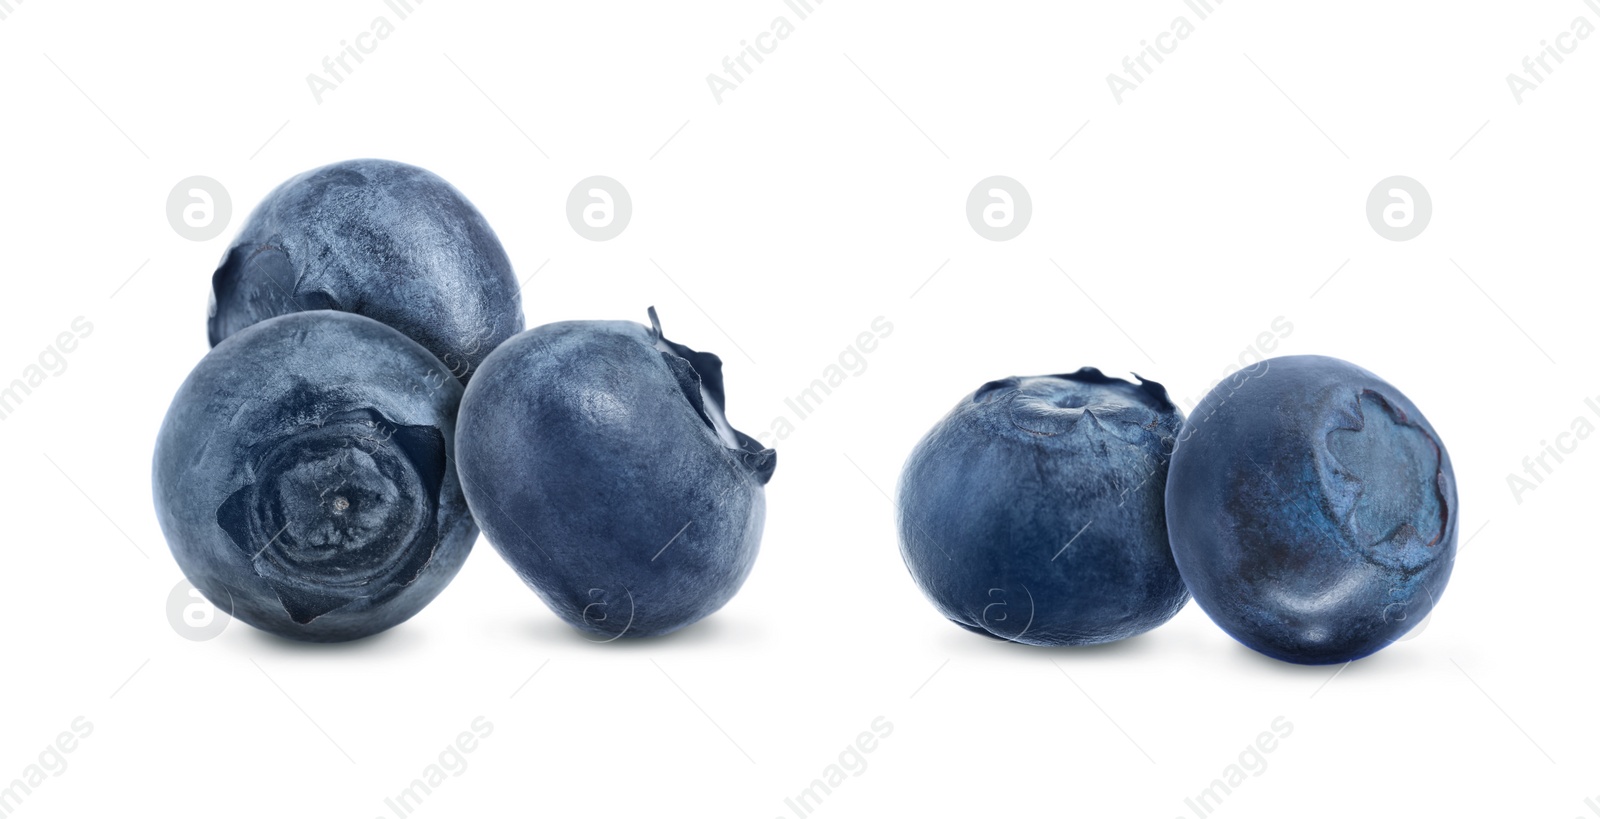 Image of Whole ripe blueberries on white background. Banner design